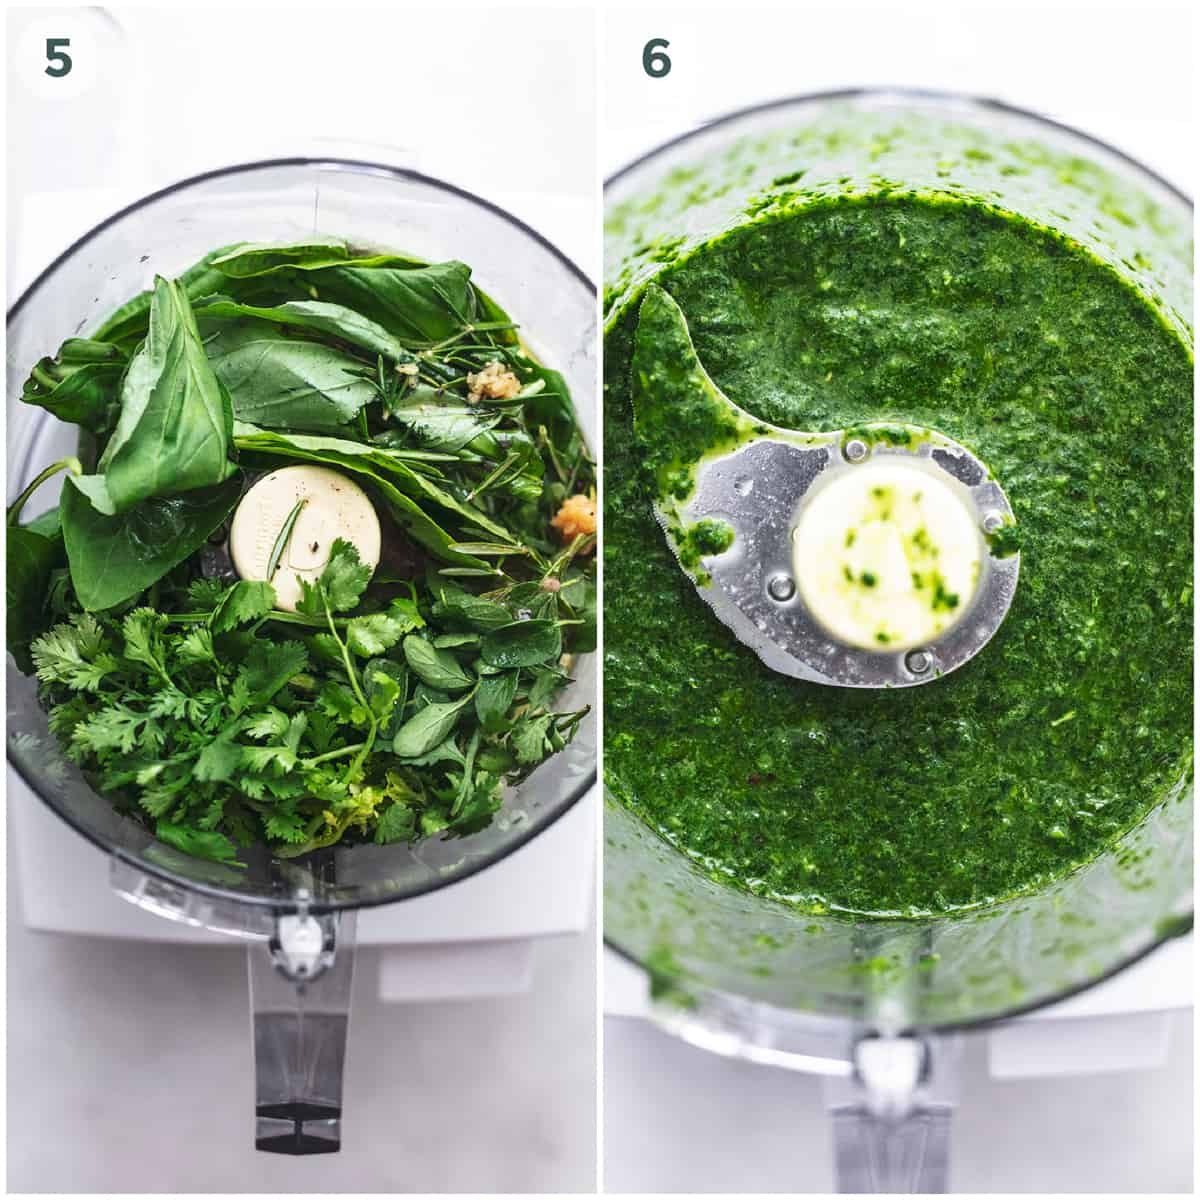 herbs before and after blending in a food processor